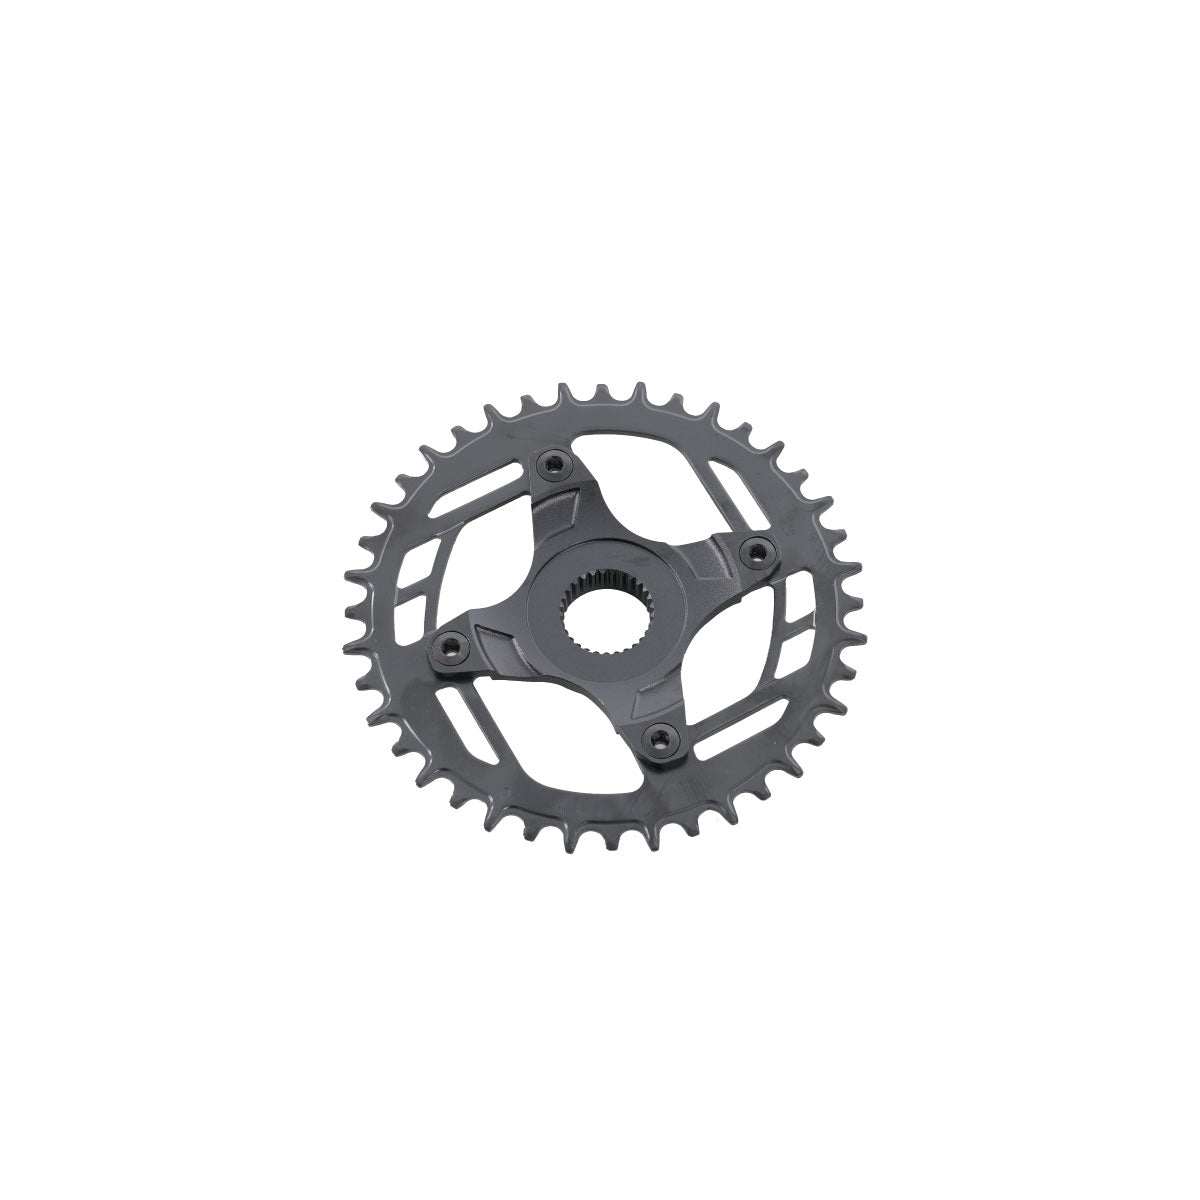 Photograph of 40 Tooth Chainring for eXC1 eMTB (E07)